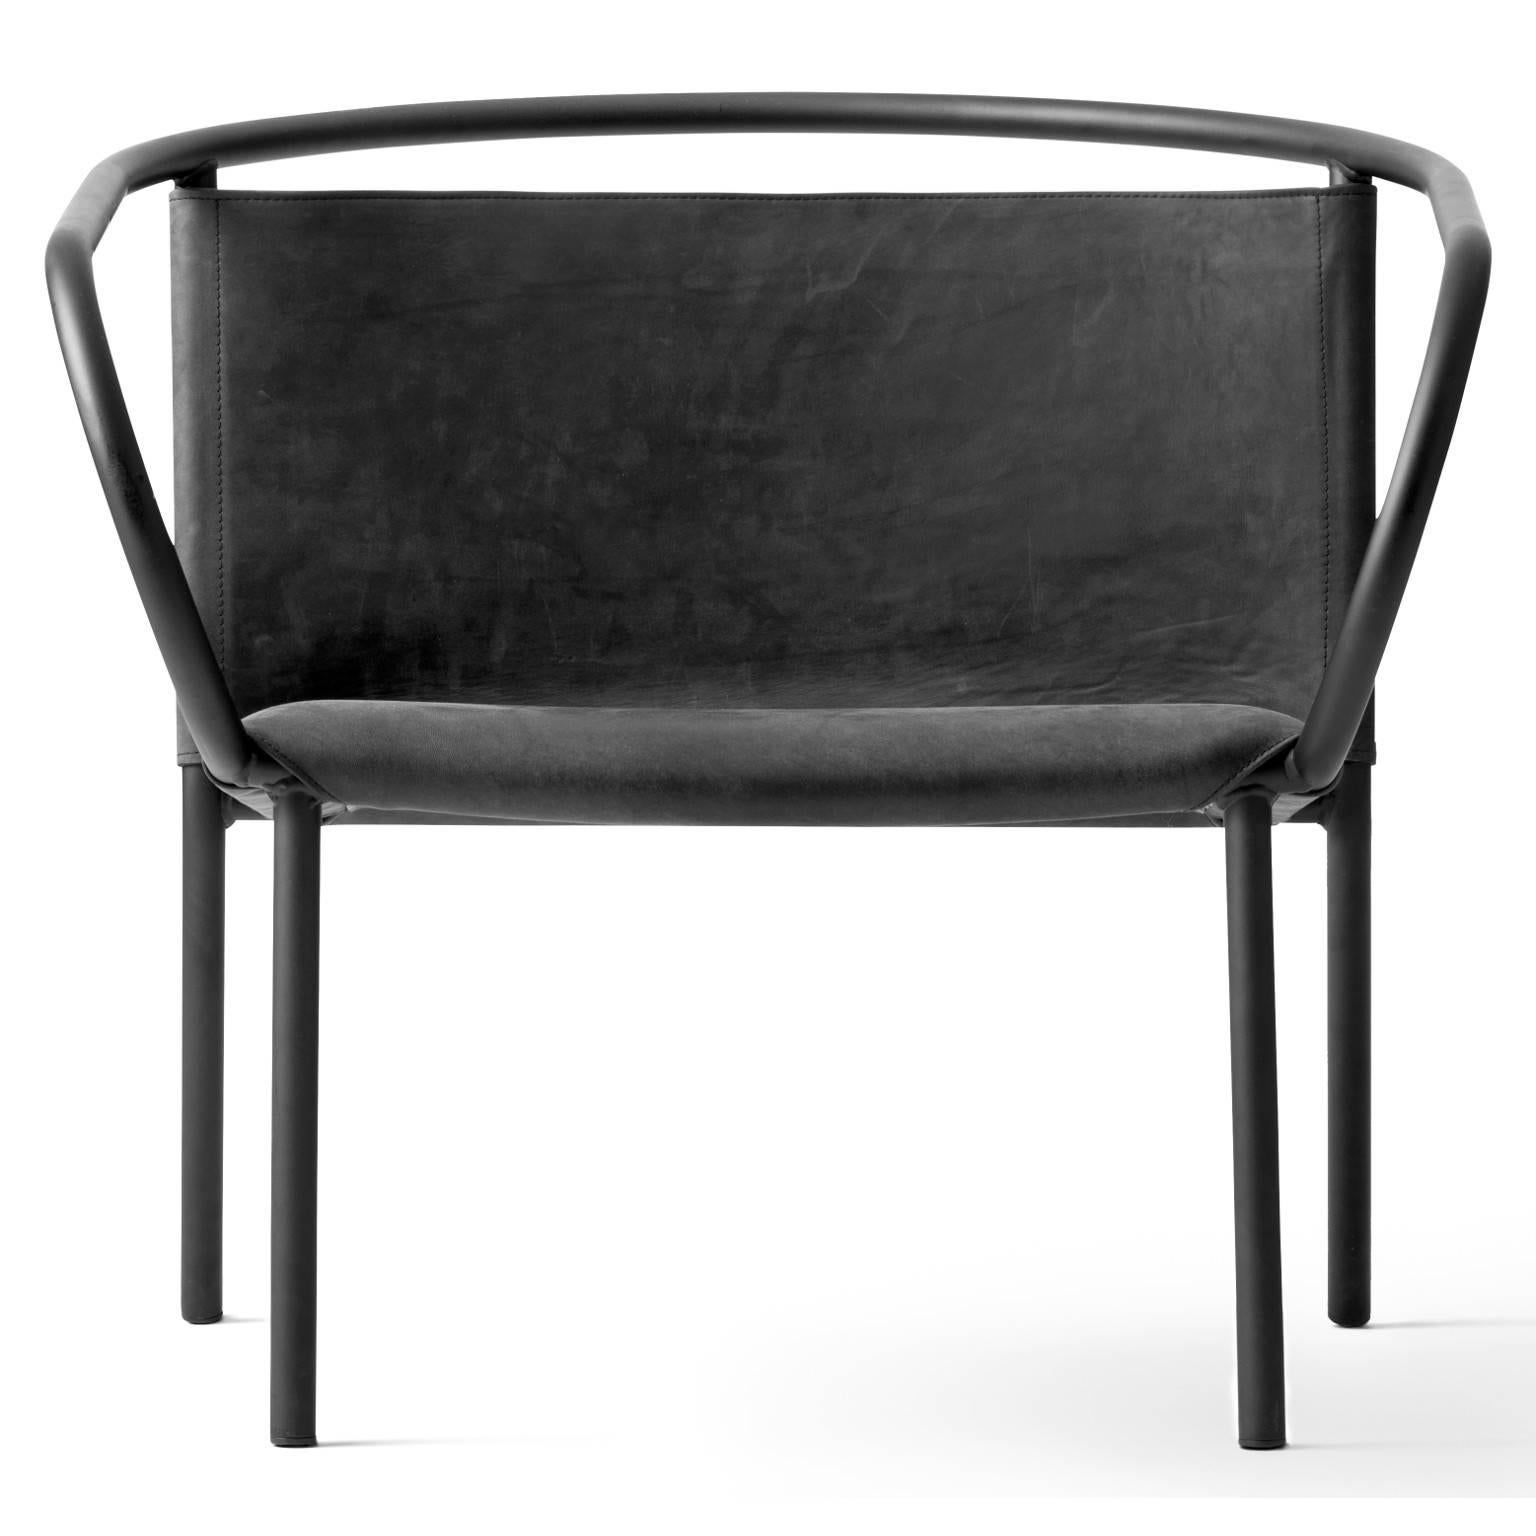 Combining the iconic to create the new. The two newcomers from Afteroom – the lounge vhair and the dining vhair - are the result of combining the inspiration from two iconic chairs of early modernism. The 'Thonet Bentwood Armchair' by Michael Thonet